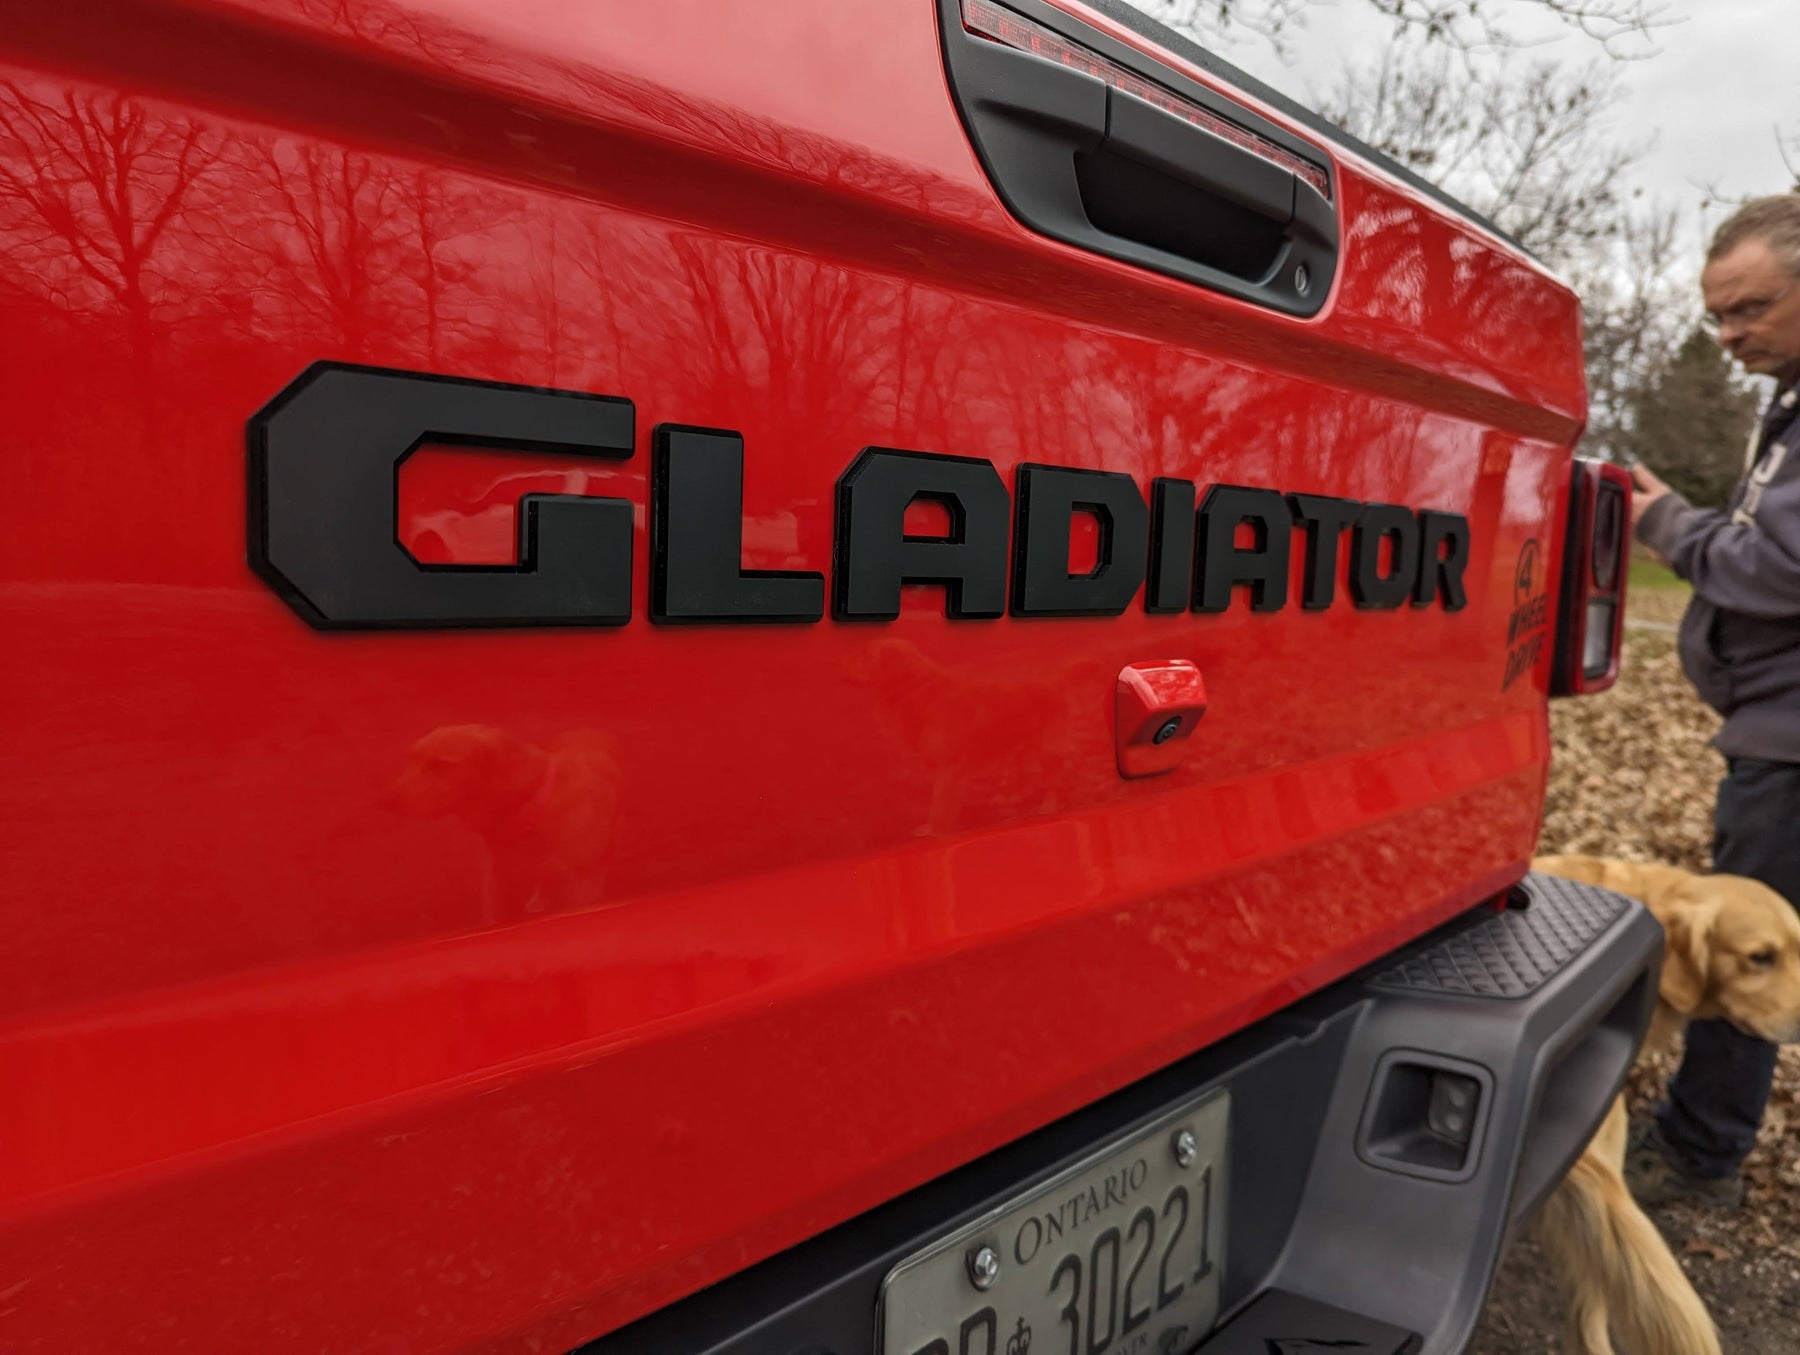 Gladiator® Tailgate Letters - Officially Licensed Product